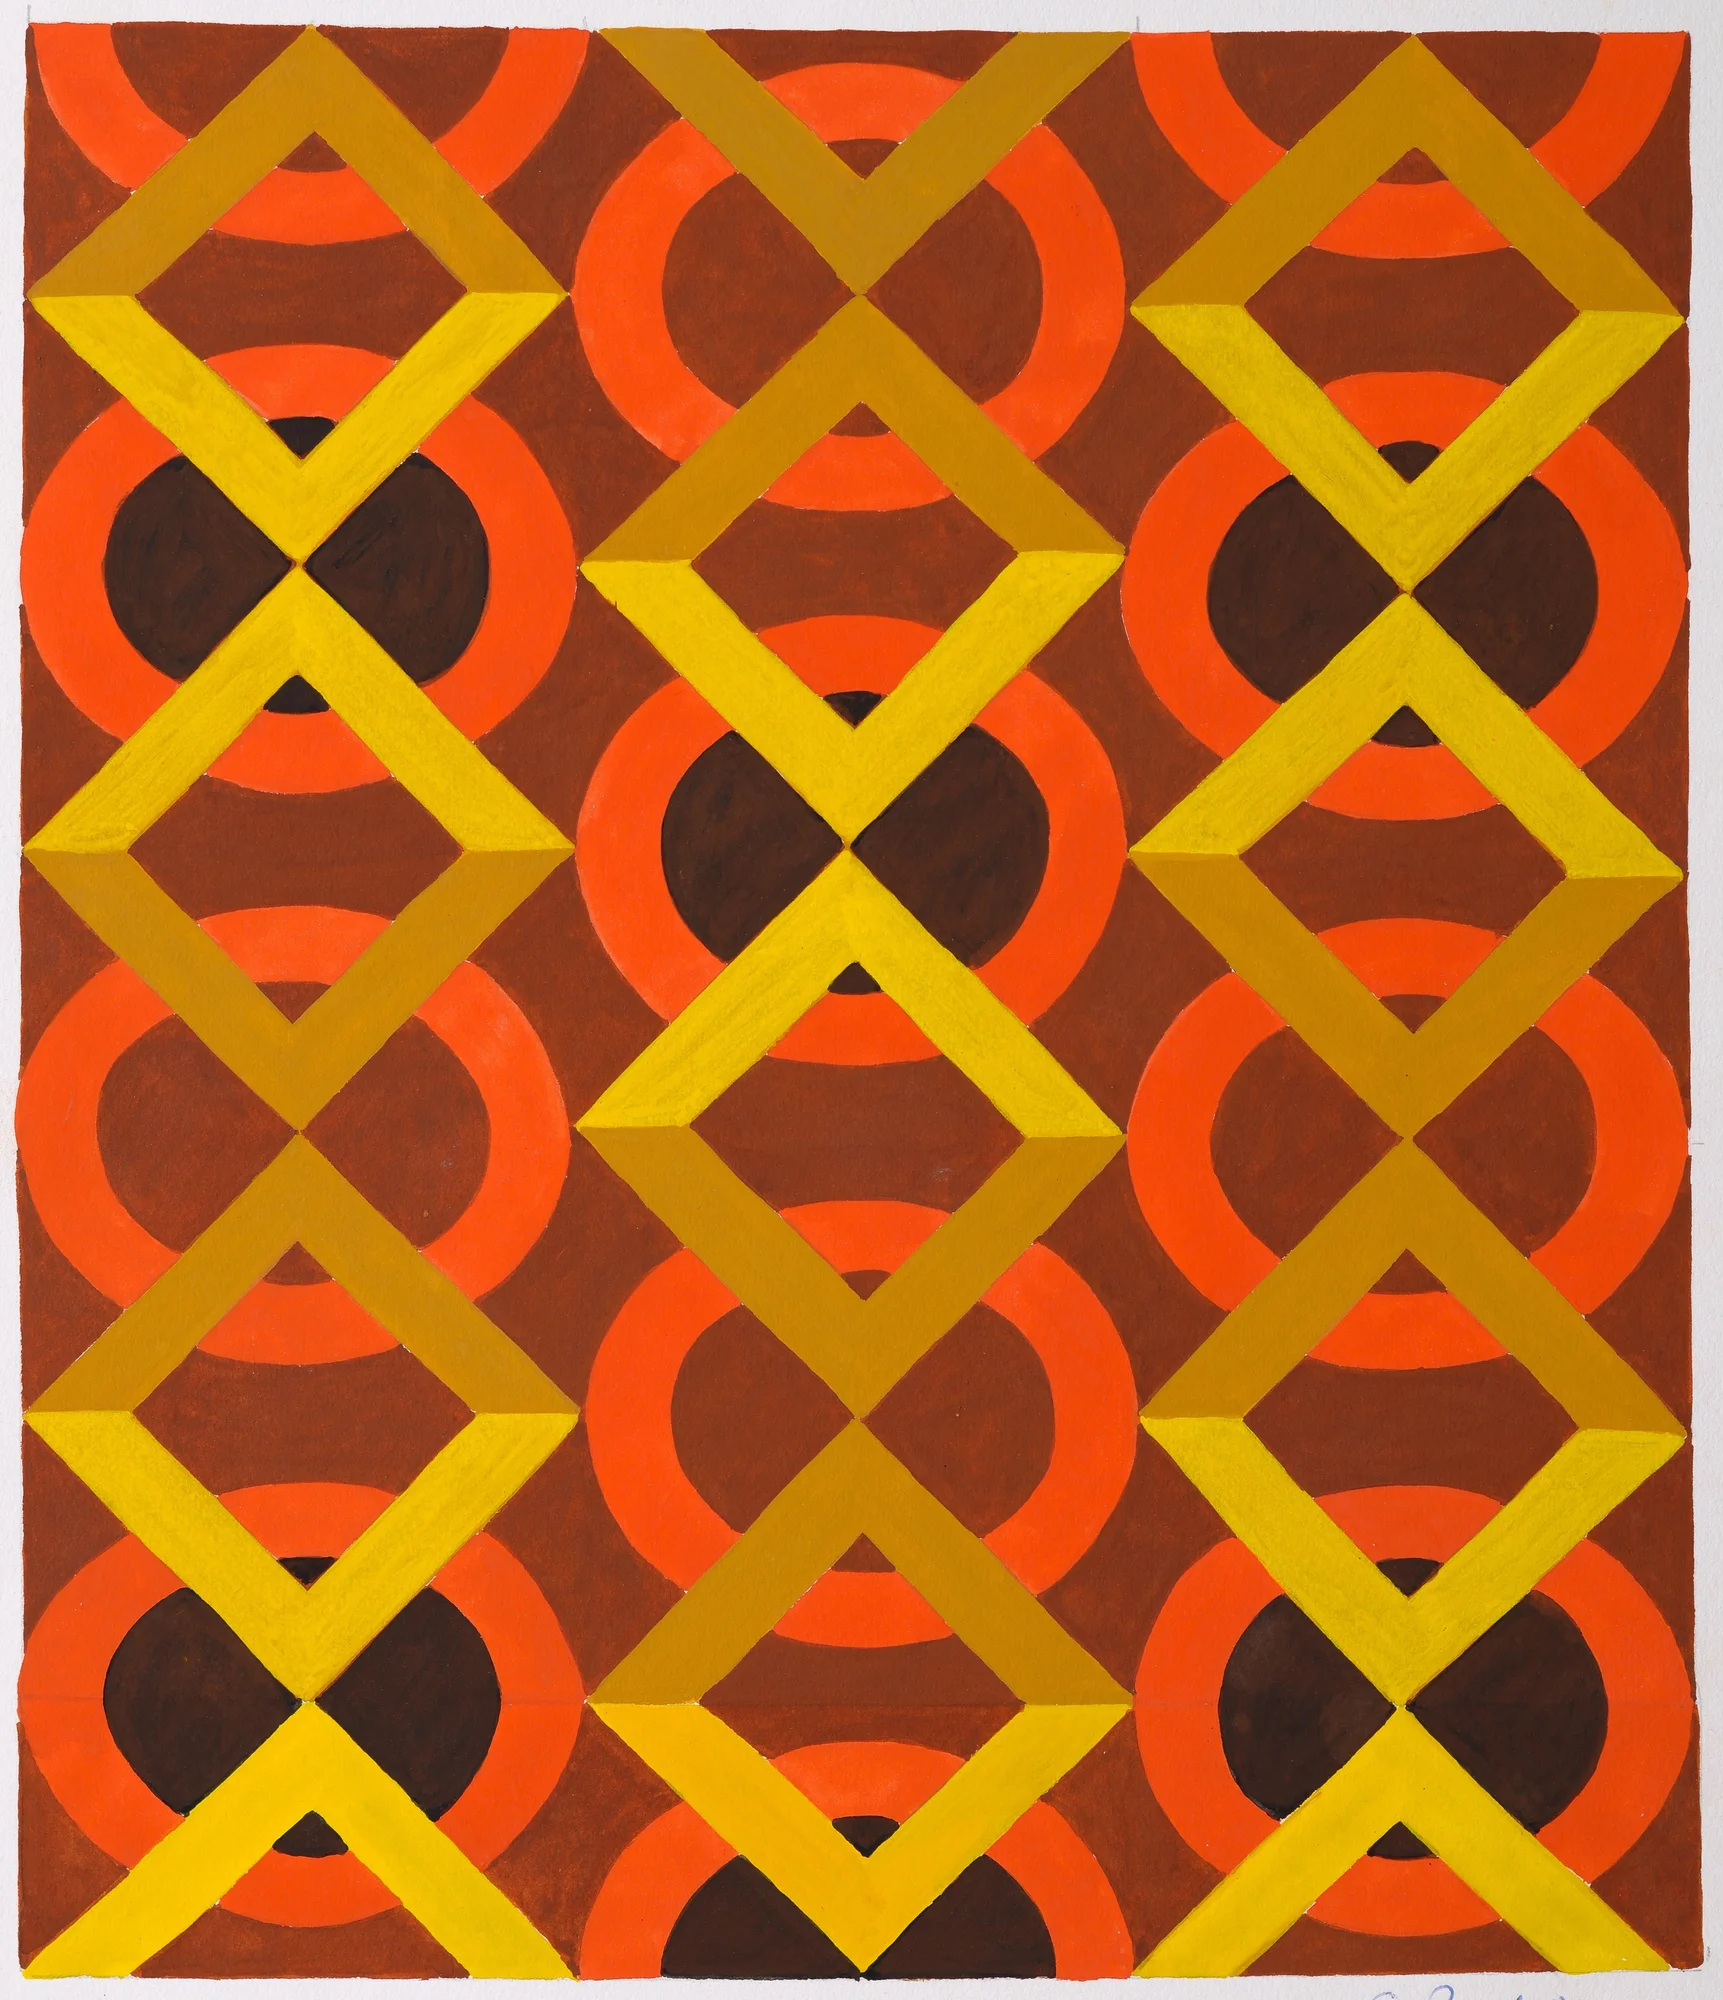 Geometrical design of rows of circles and squares in orange, black and yellow on a dark orange / brown ground.